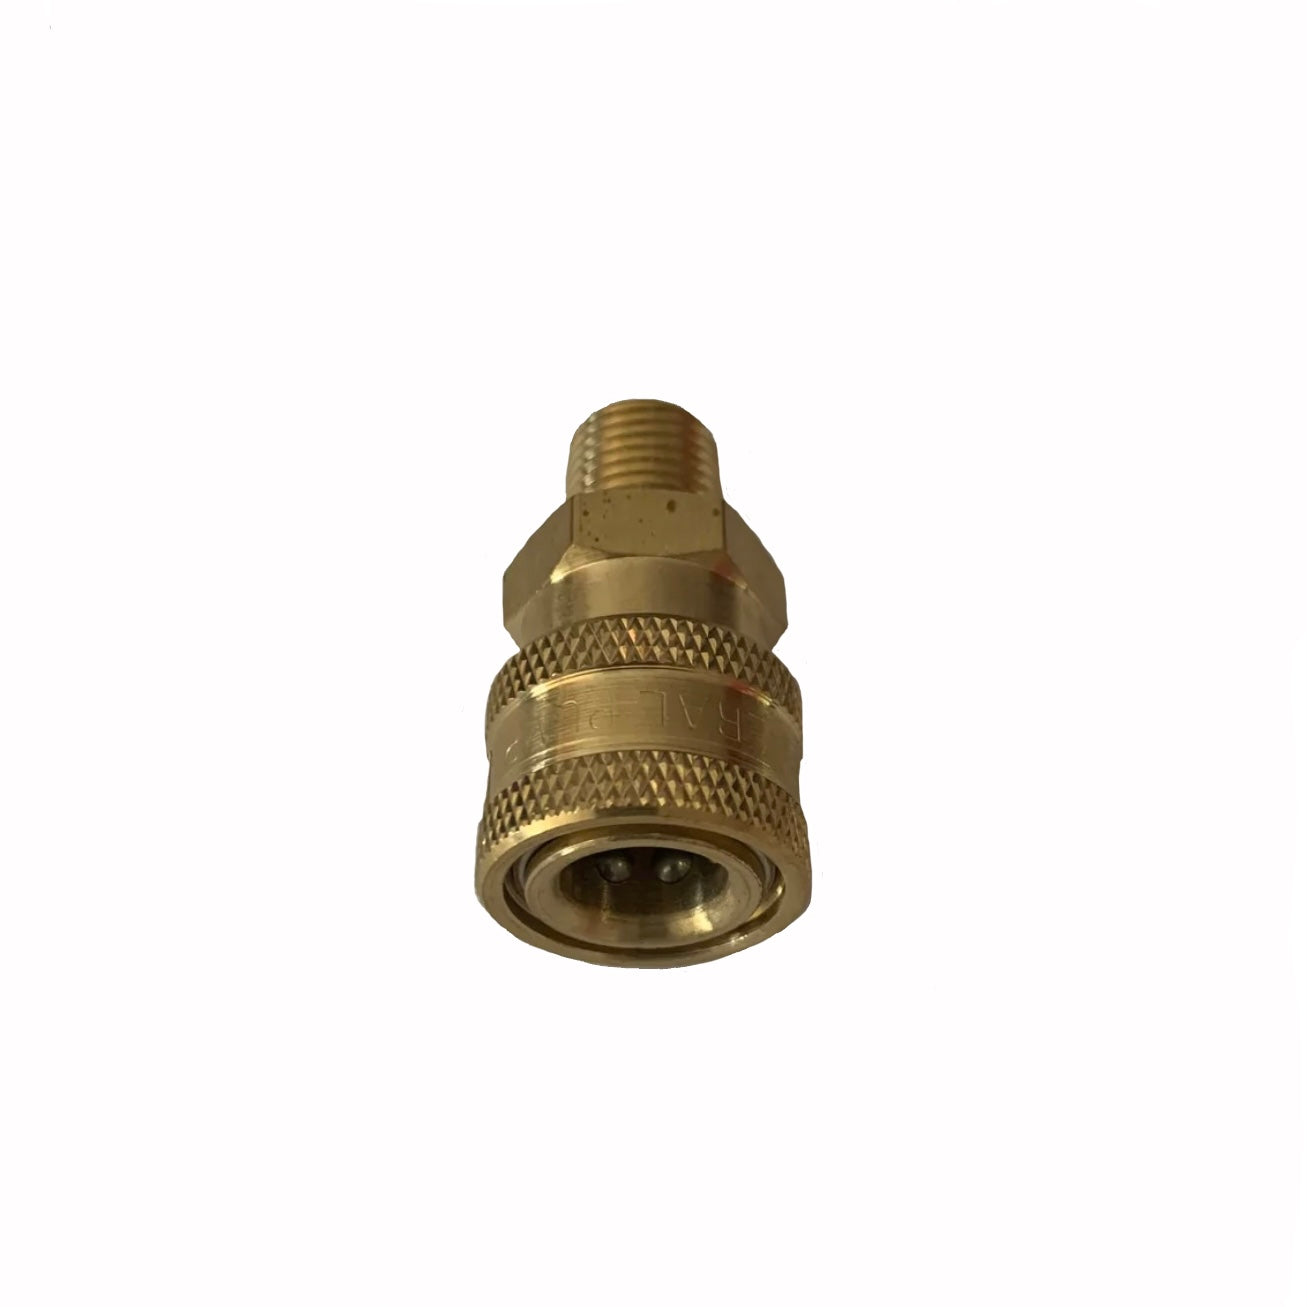 Quick Connect Brass MPT Coupler Socket 1/4"